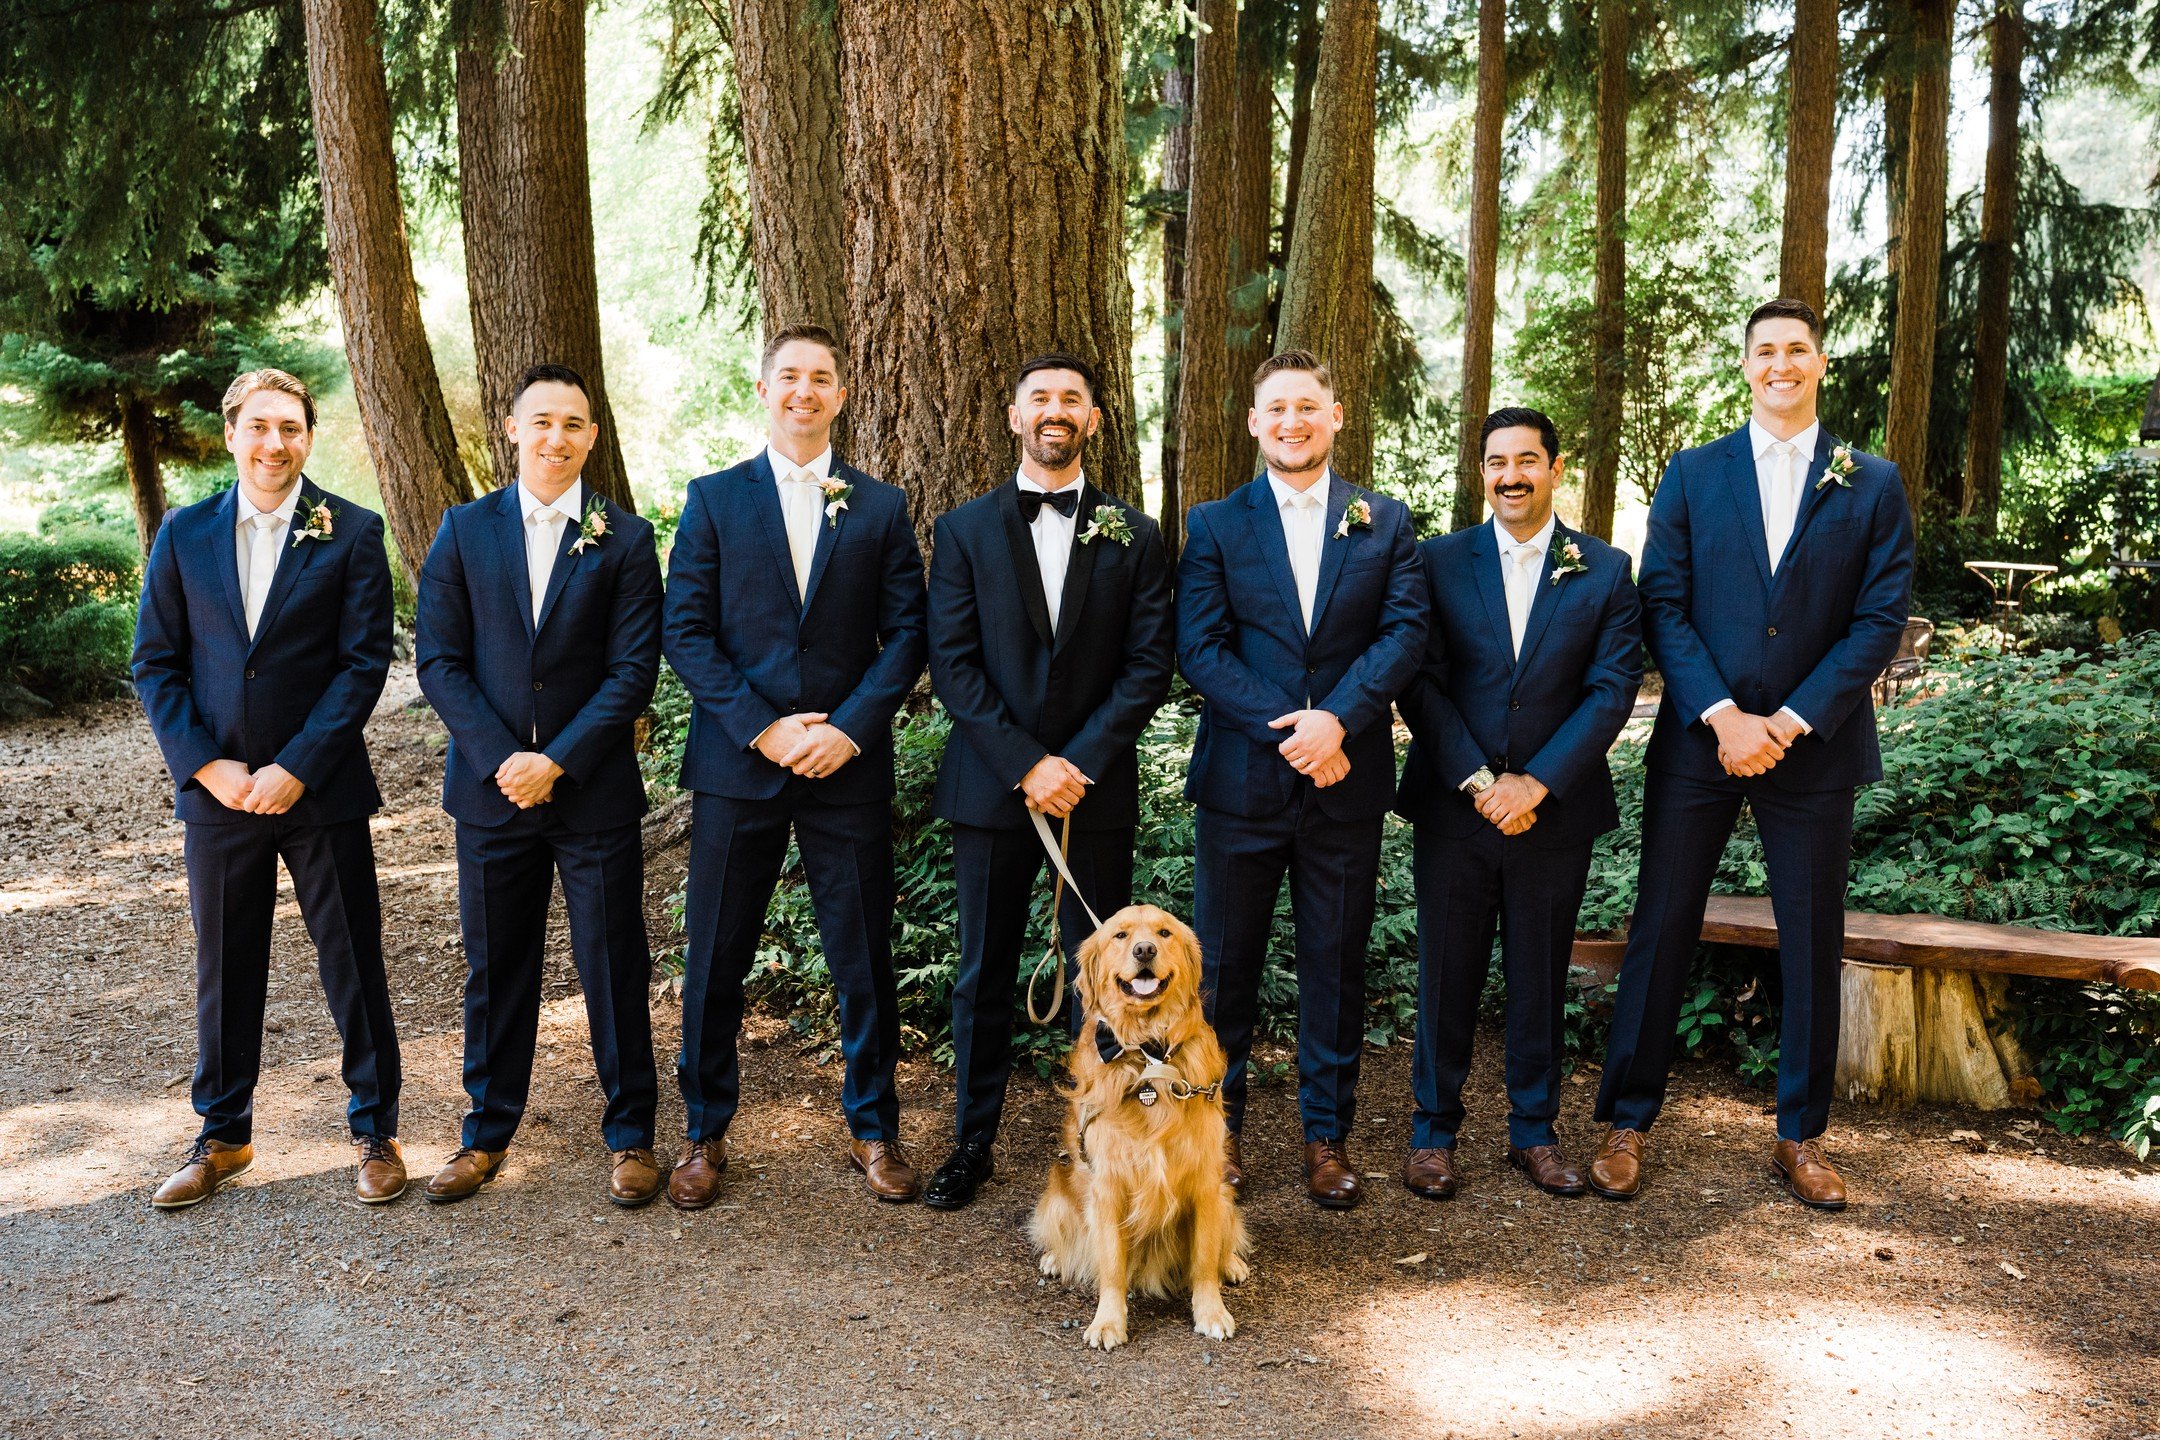 When you get to hang out and just be one of the guys! Stanley was the happiest boy being a groomsmen on the big day 🤵 🐾

We love when the pups get to be part of the wedding party fun! 
.
.
.
#dogsinweddings #bestdog #weddingpaws #pnwweddings #golde